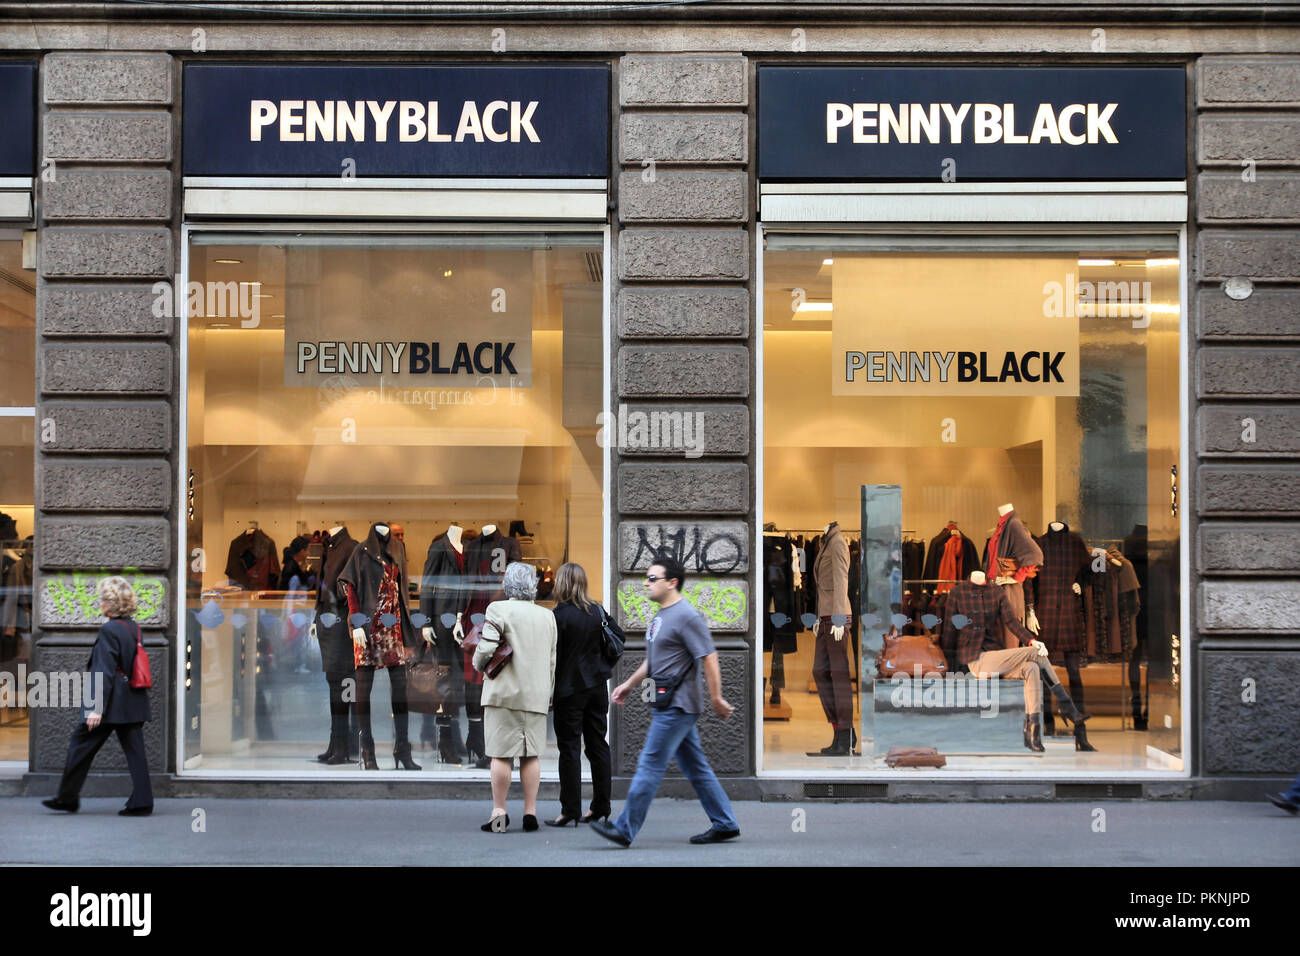 MILAN - OCTOBER 7: Penny Black store on October 7, 2010 in Milan, Italy. Penny  Black is part of famous Max Mara group with 2254 stores and 1.2bn euros  Stock Photo - Alamy